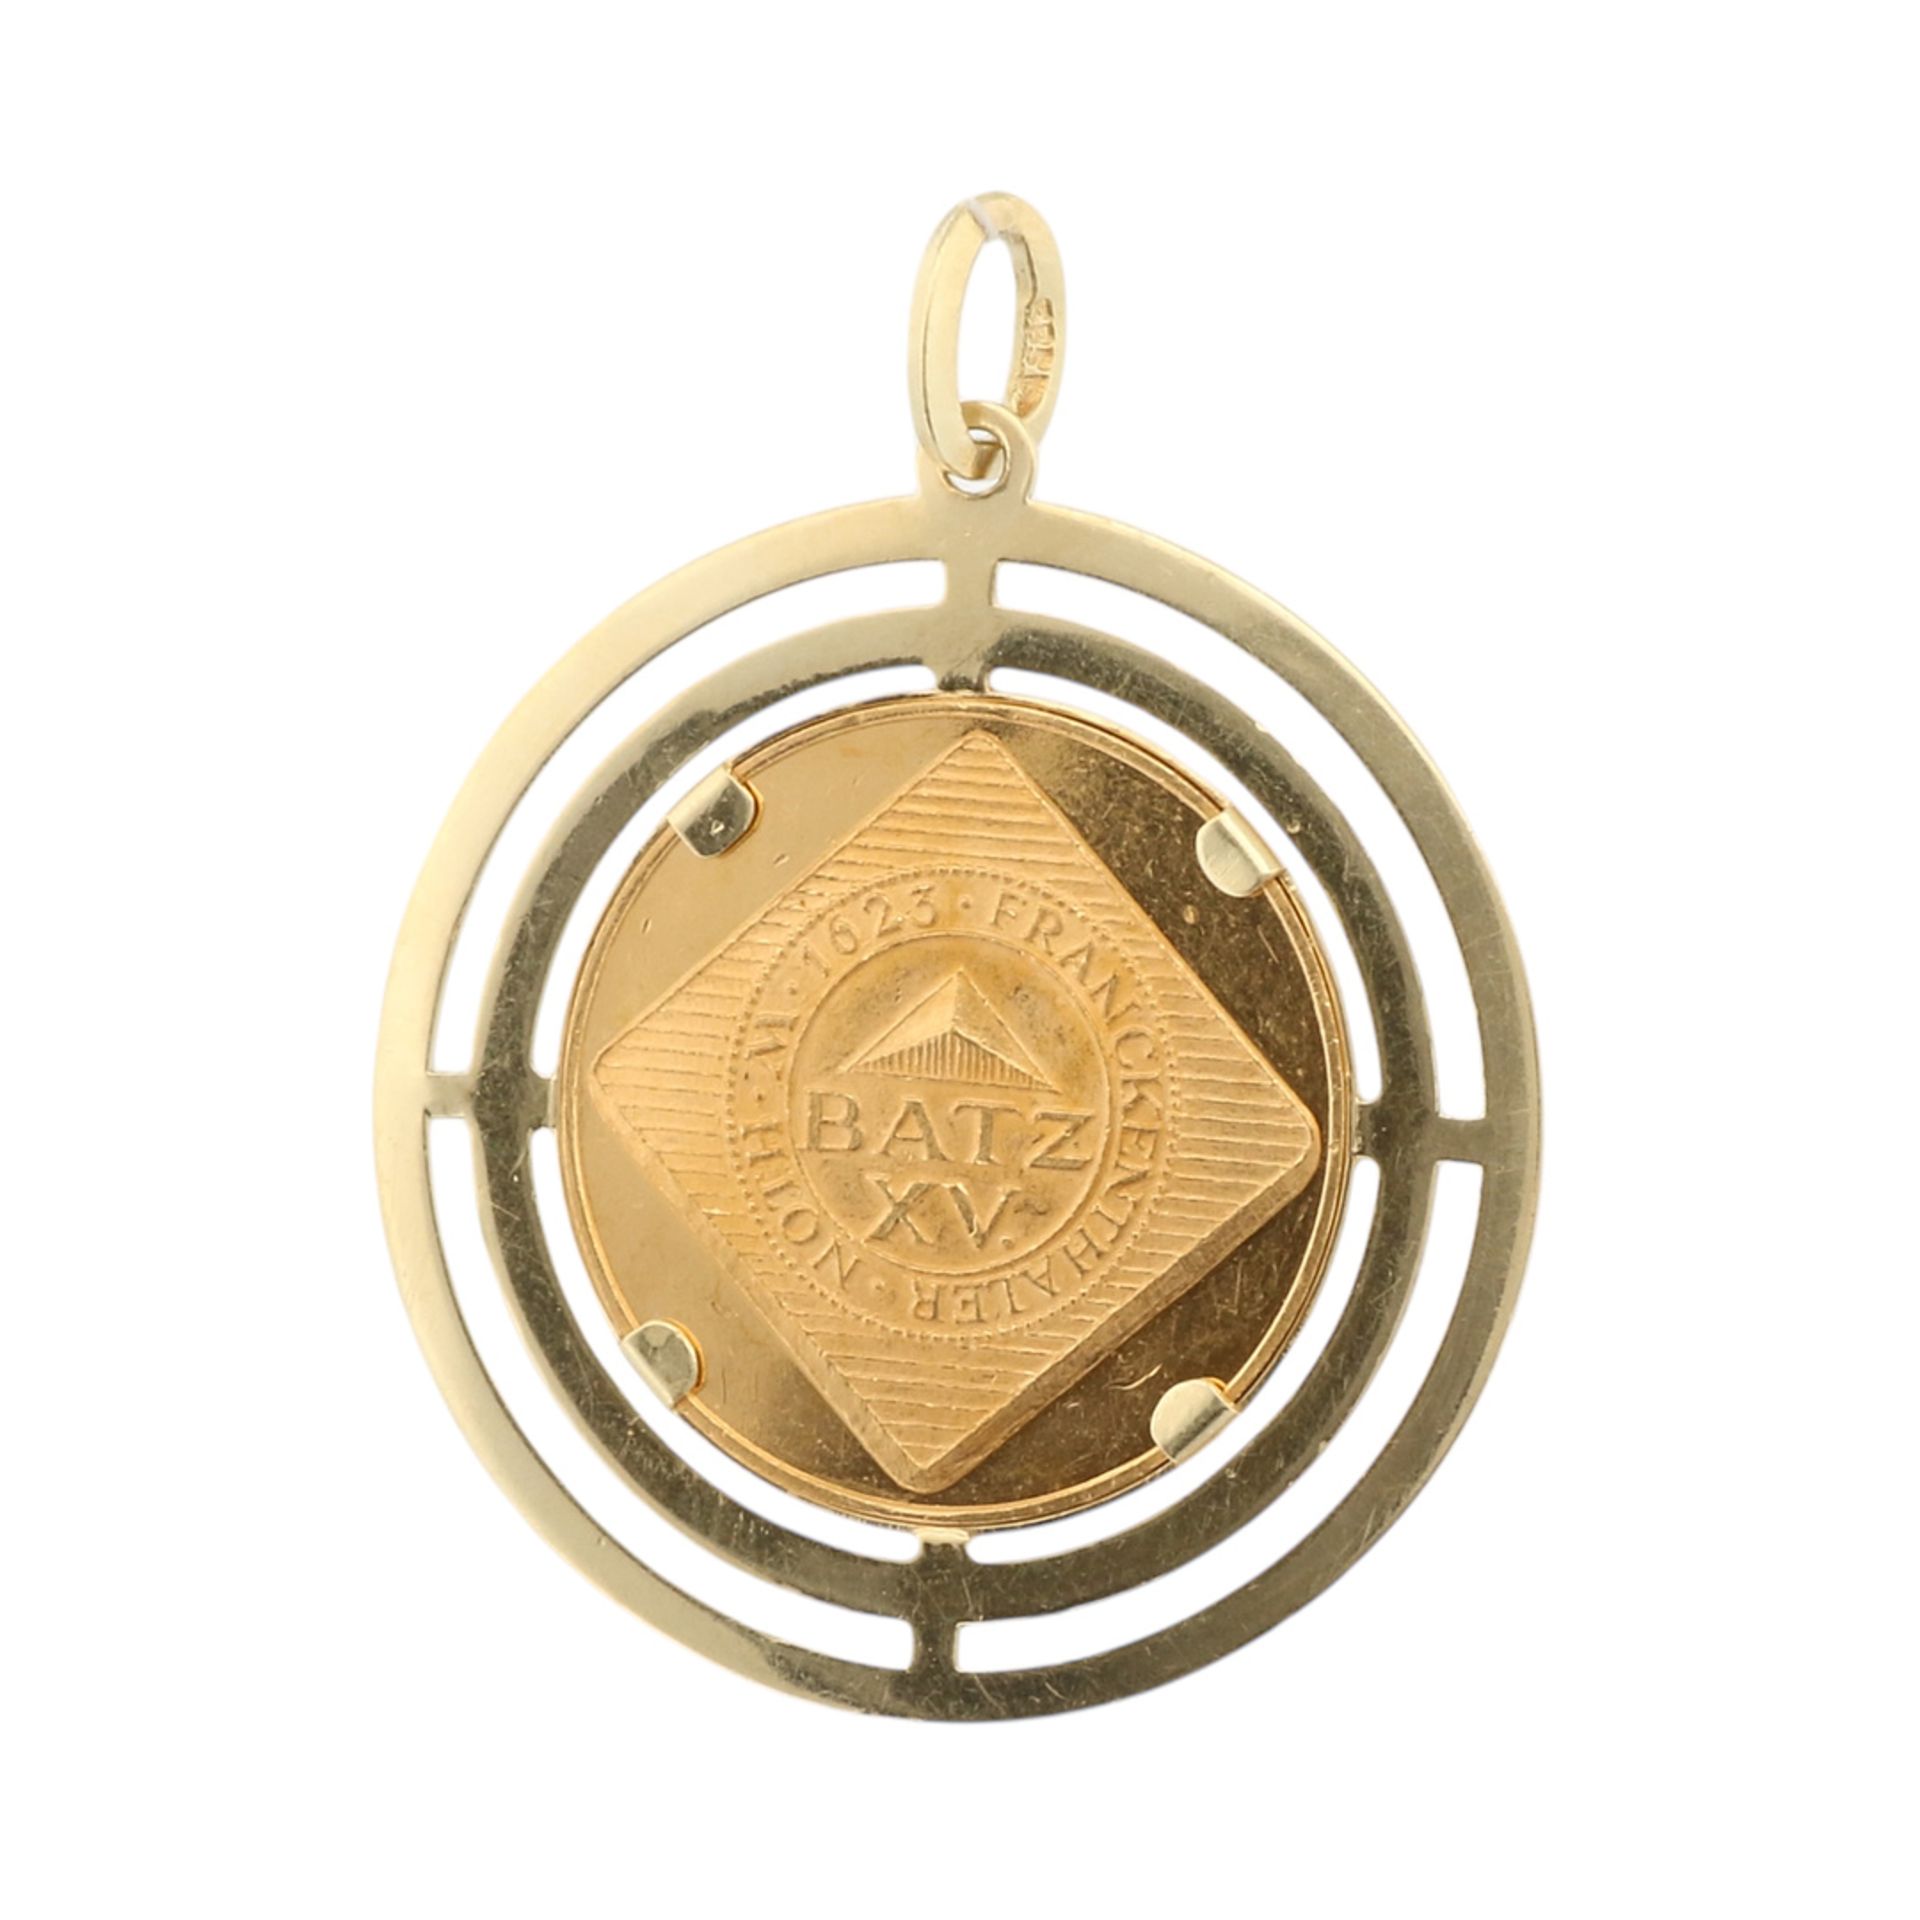 Pendant with medal - Image 2 of 2